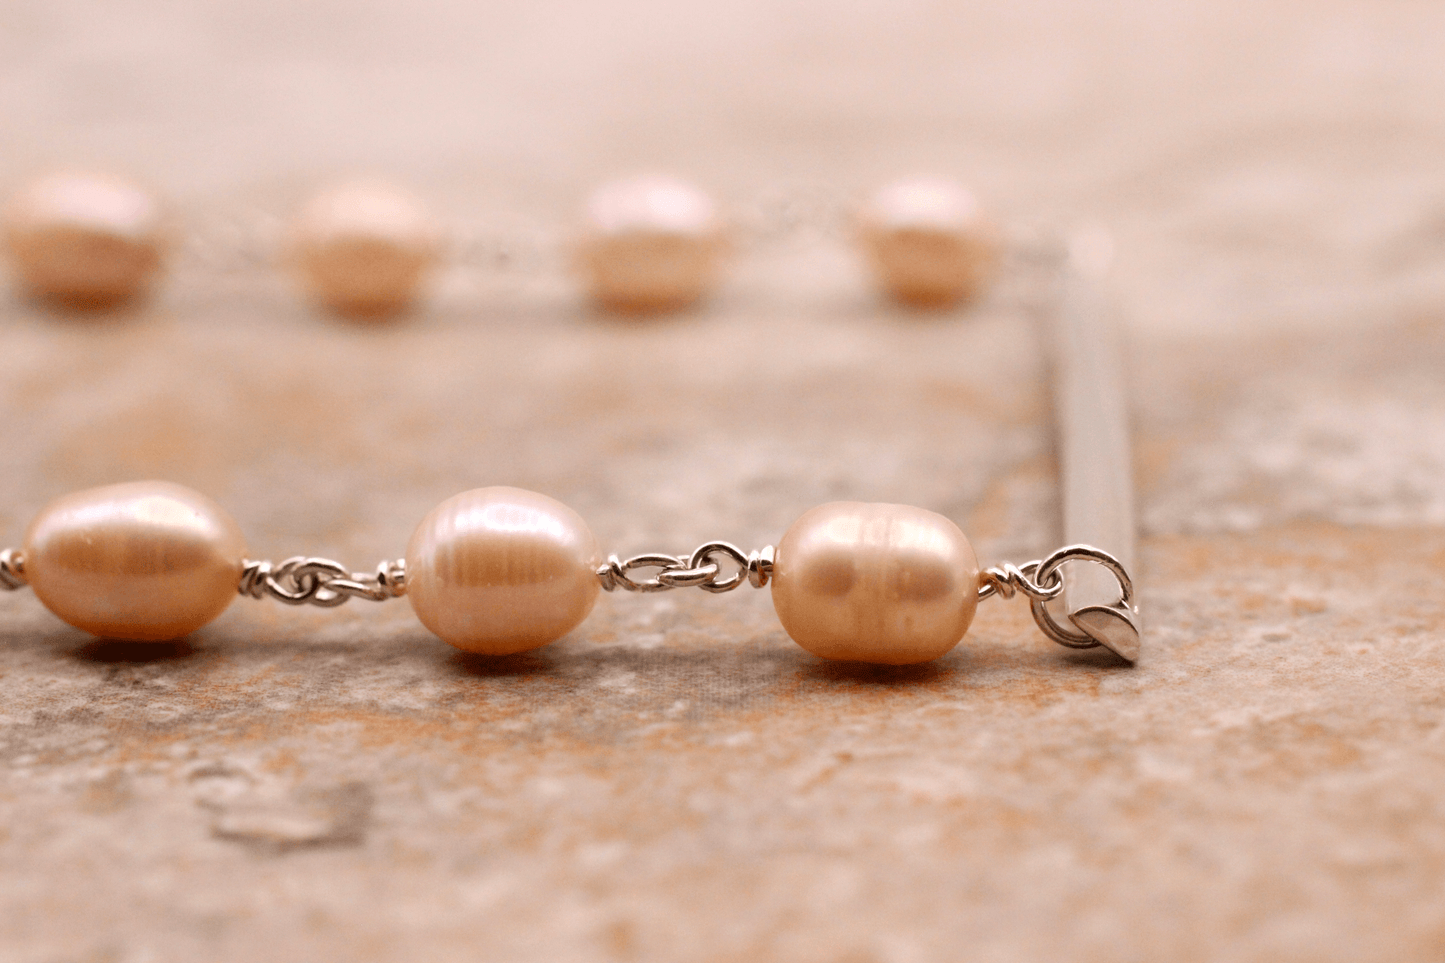 Sterling Silver, Pearl Chain & Bar Necklace ~ Handcrafted Jewelry ~ VANDA inspired